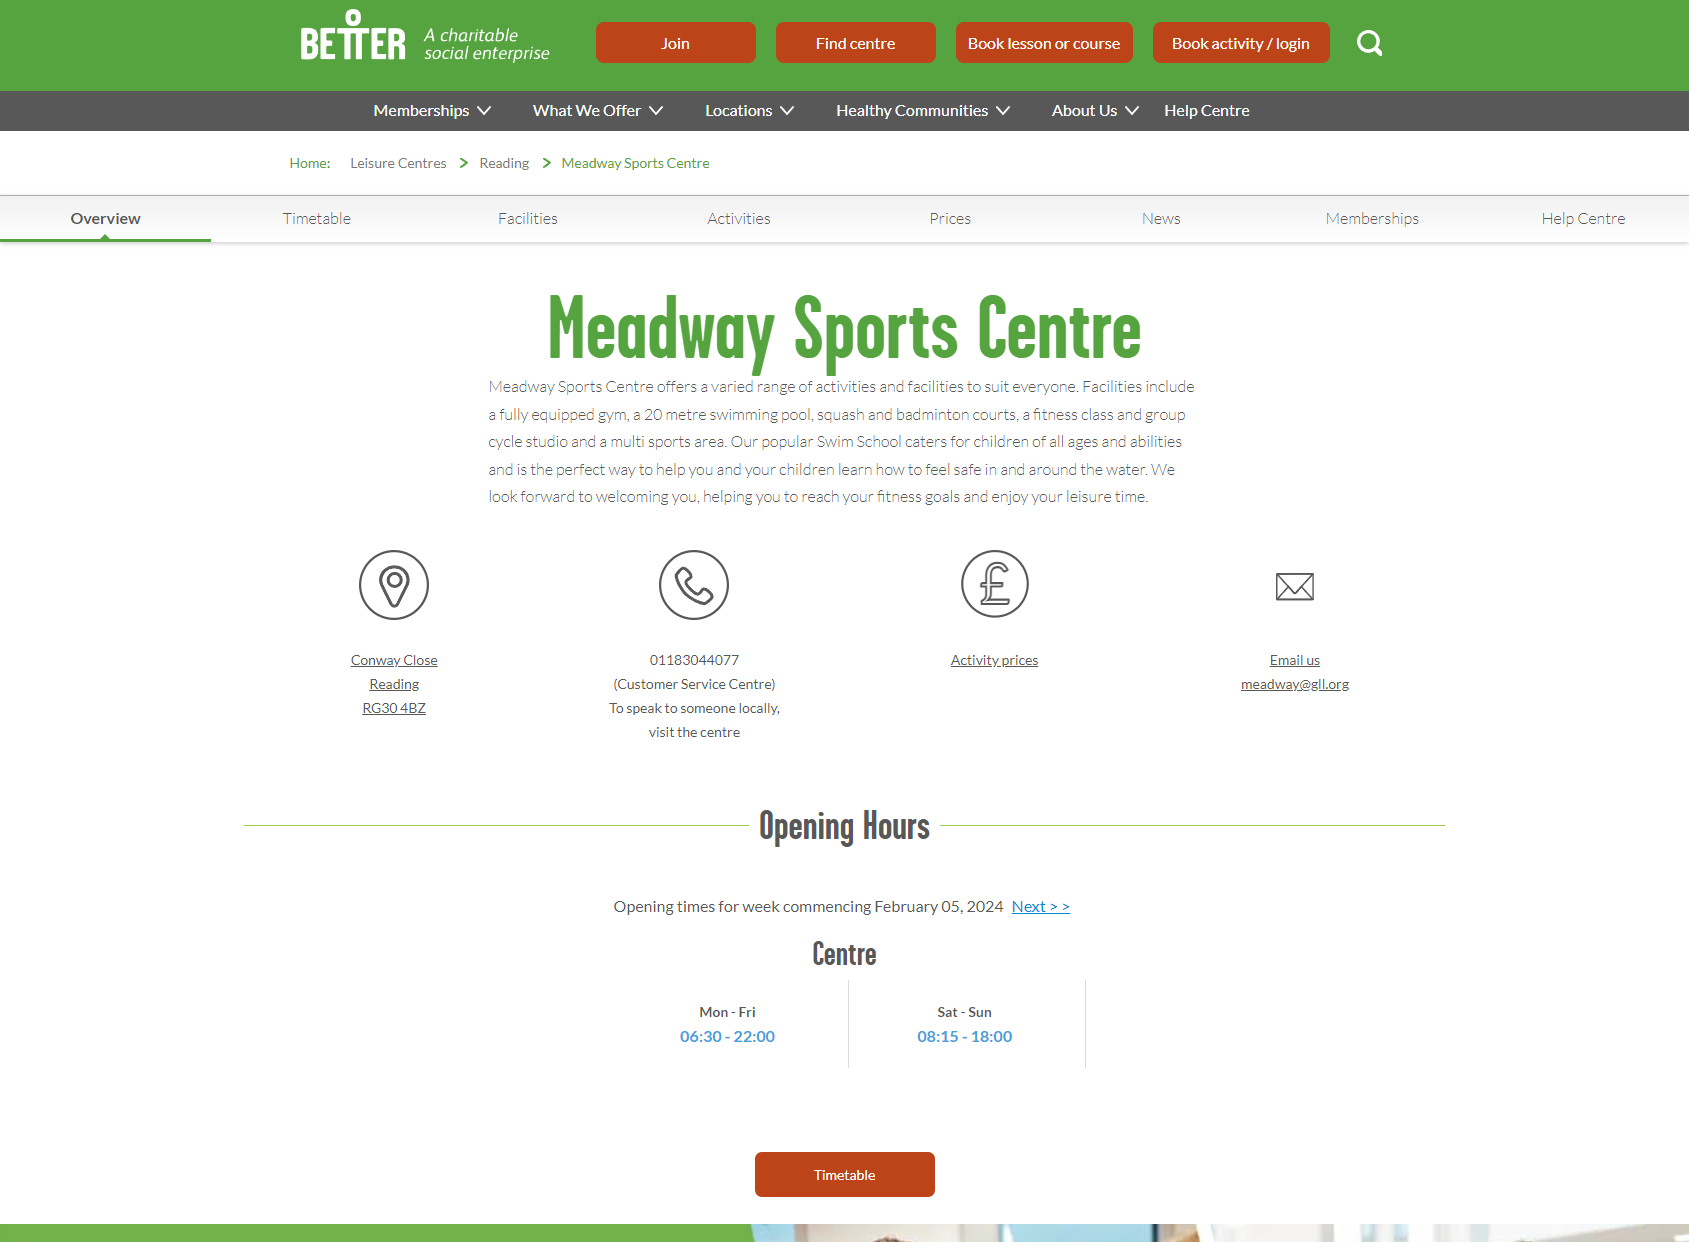 Meadway Sports Centre